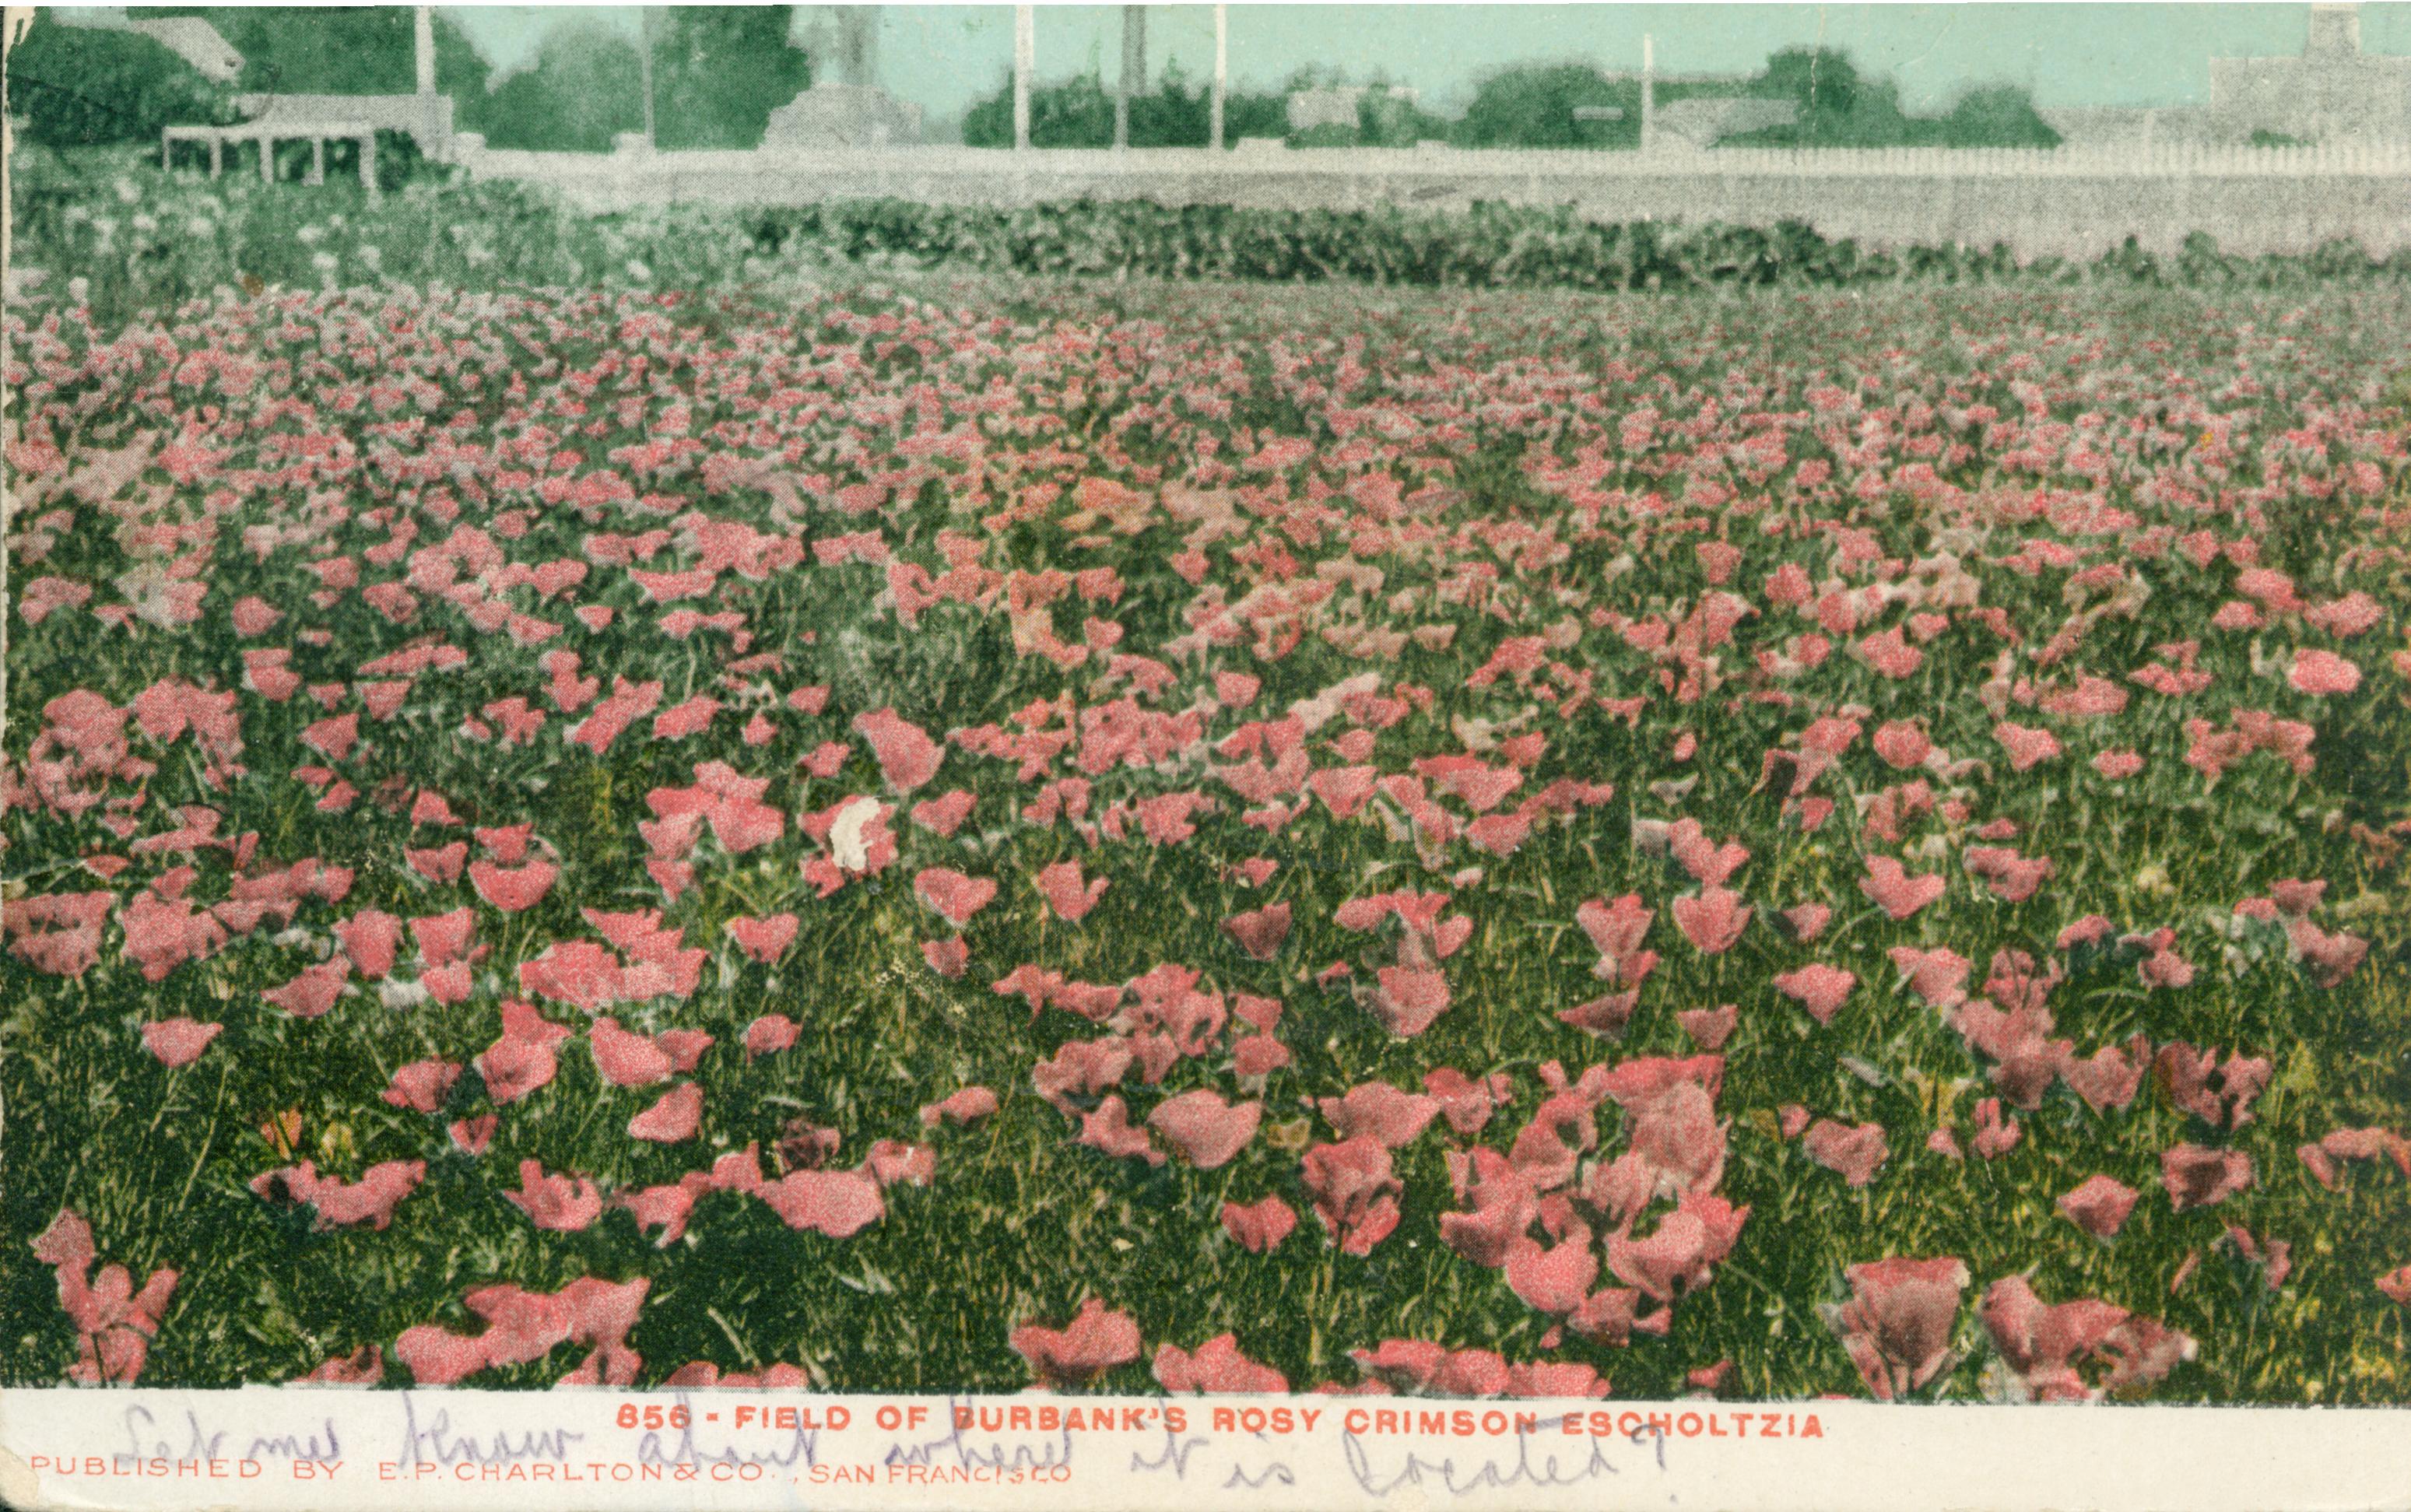 Shows a field of red flowers